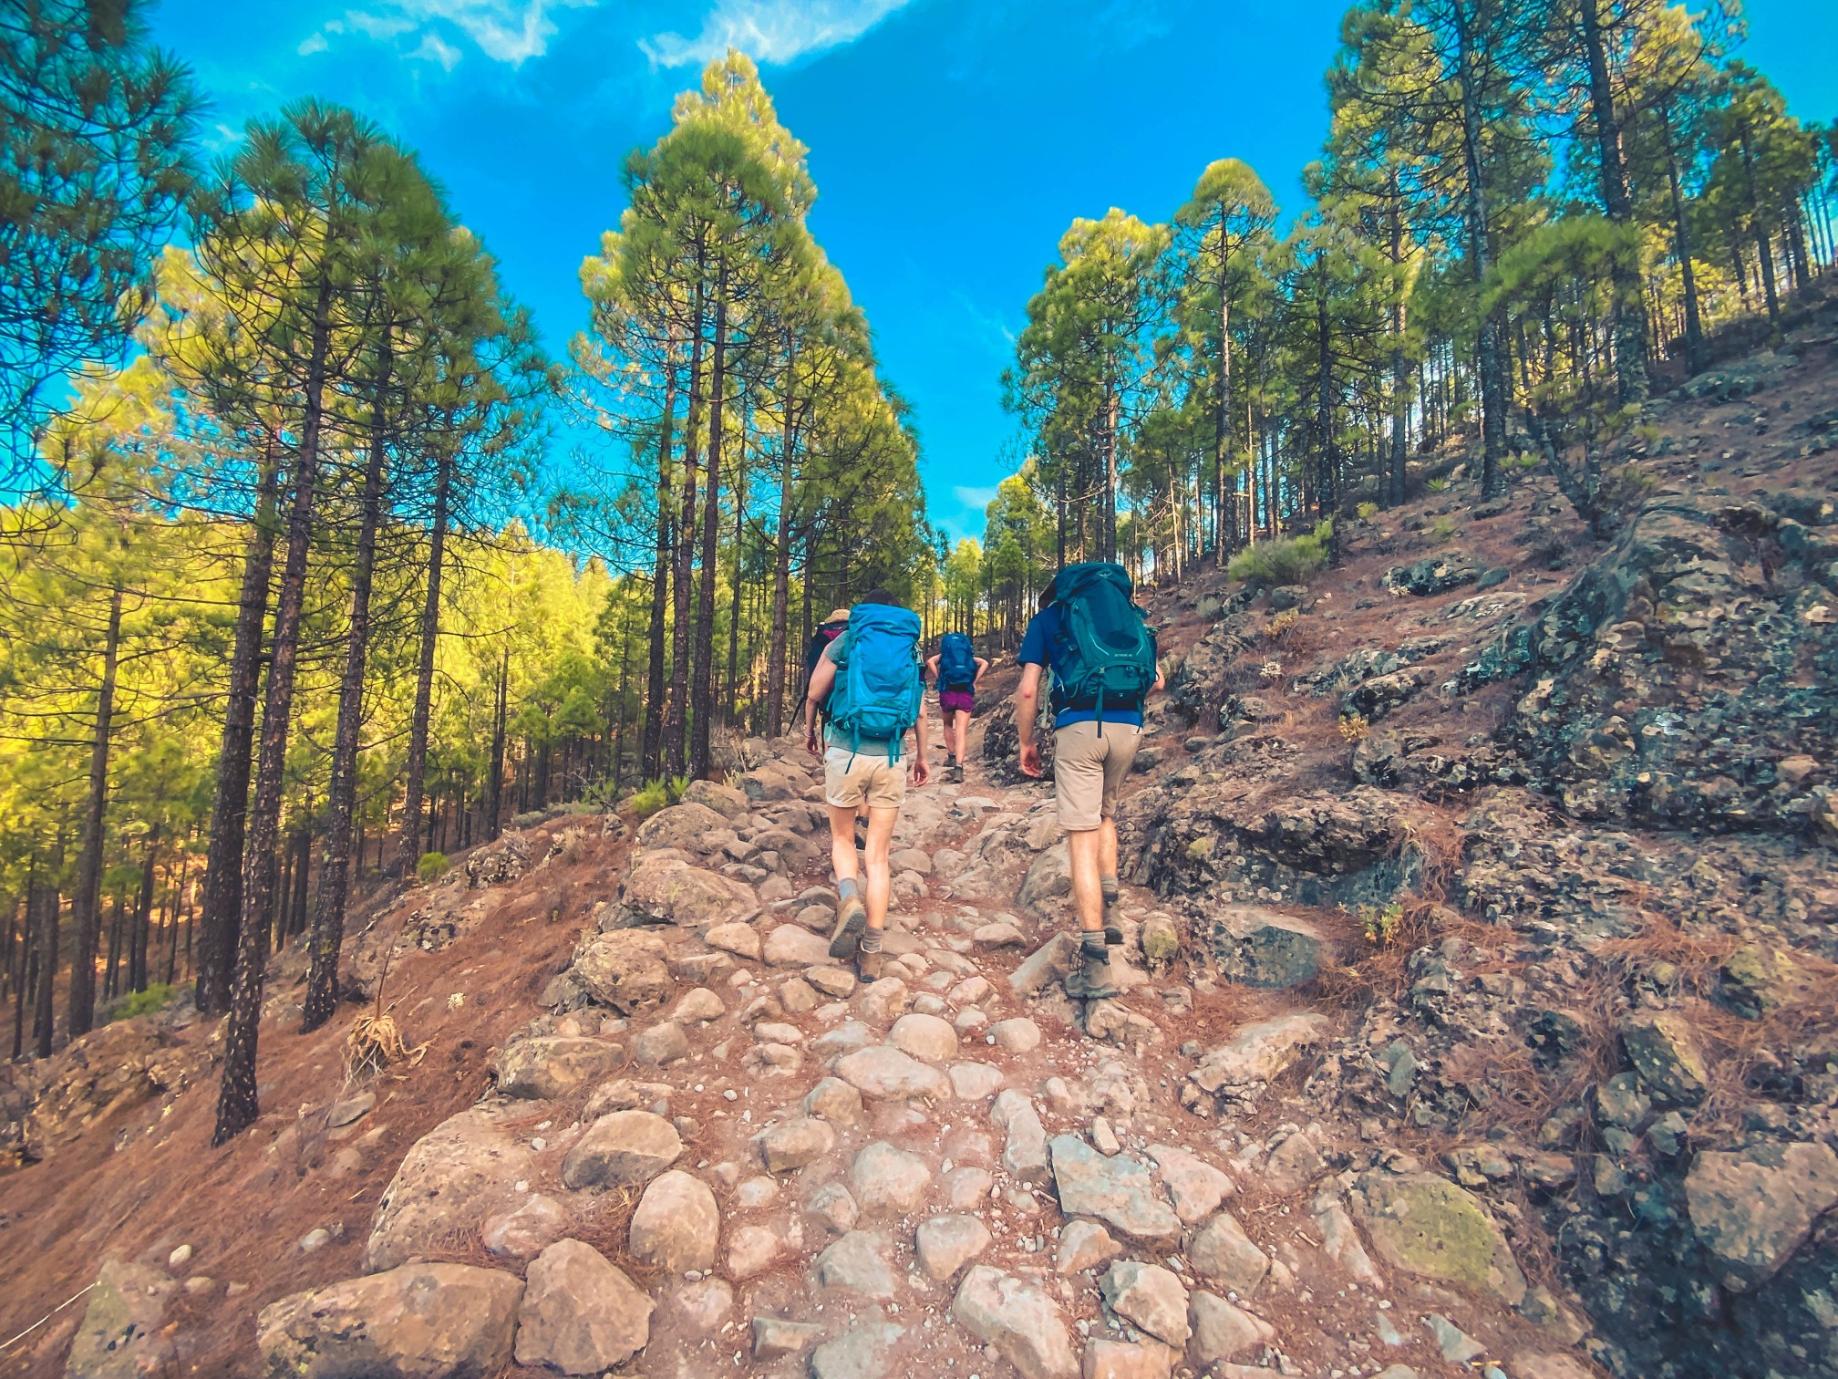 Hiking through the pine forest towards Roque Nublo. Photo: Climbo.